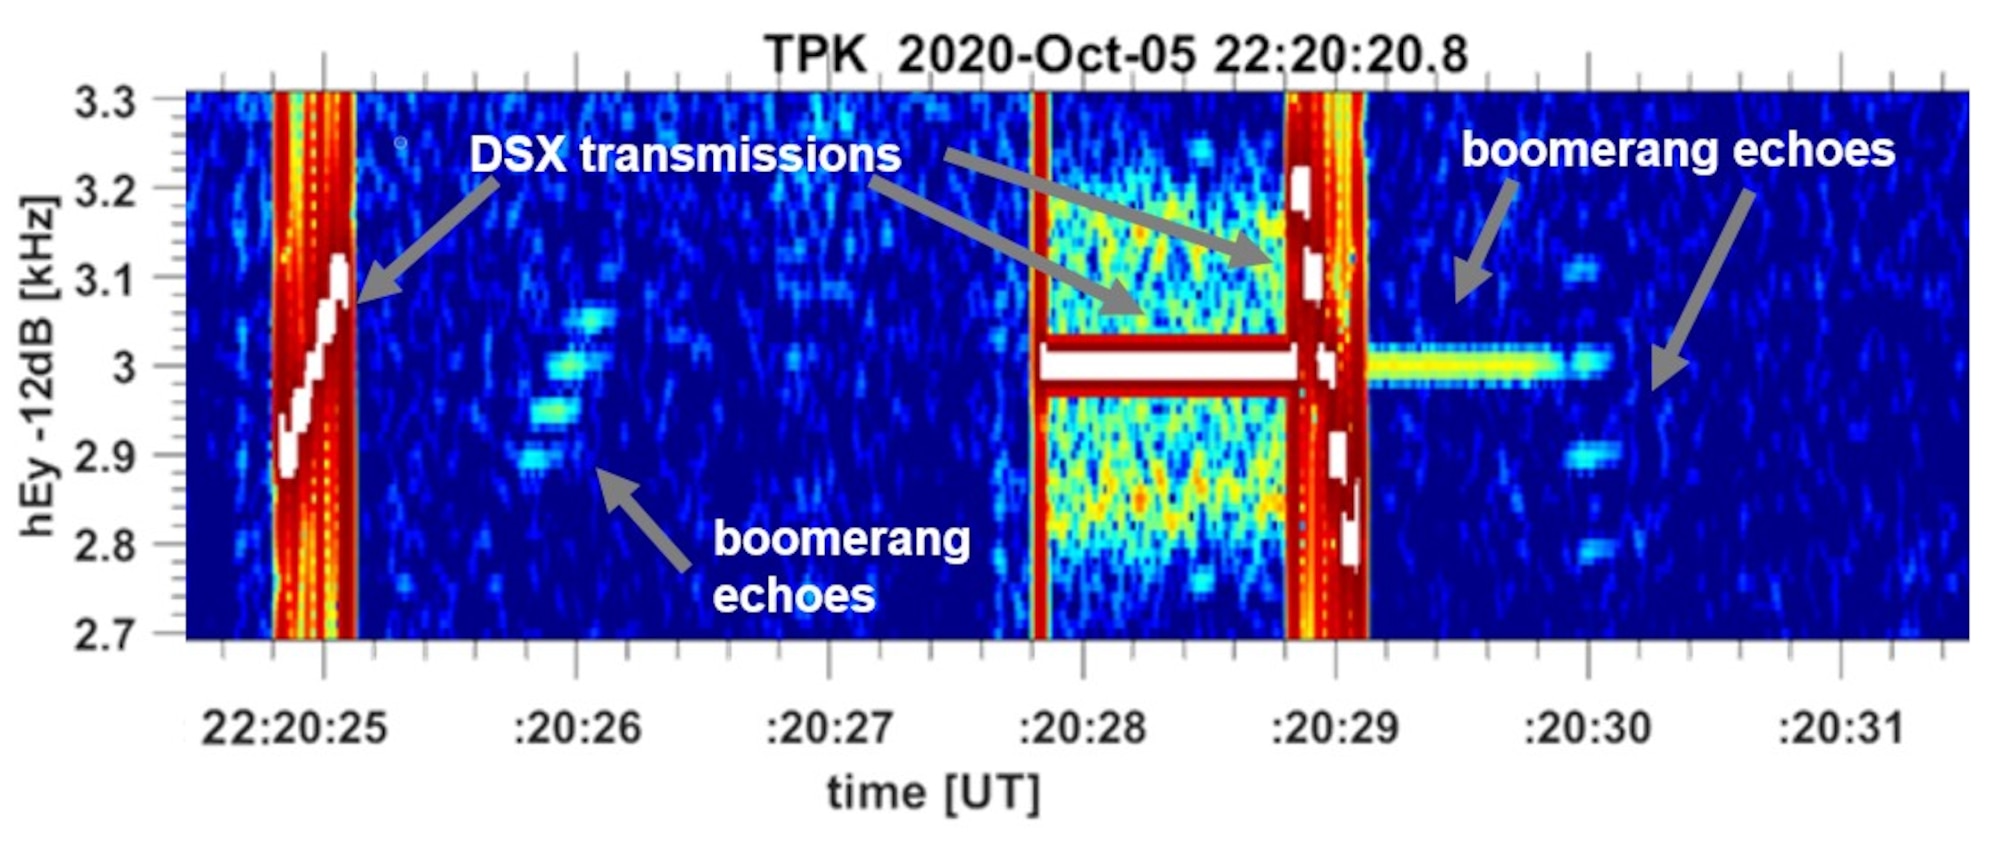 A spectrogram from the Broad Band Receiver on AFRL’s Demonstration and Science Experiments (DSX) spacecraft showing “boomerang” signals on Oct. 5, 2020. Colors show radio wave power with transmissions from DSX and return echo signals (boomerangs) indicated. It shows a seven-second time period from left to right and radio frequency increasing from bottom to top. This is one of dozens of boomerangs seen by DSX, which are being analyzed to understand how very low frequency (VLF) radio waves behave in near-Earth space. (Courtesy Image/Stanford University)